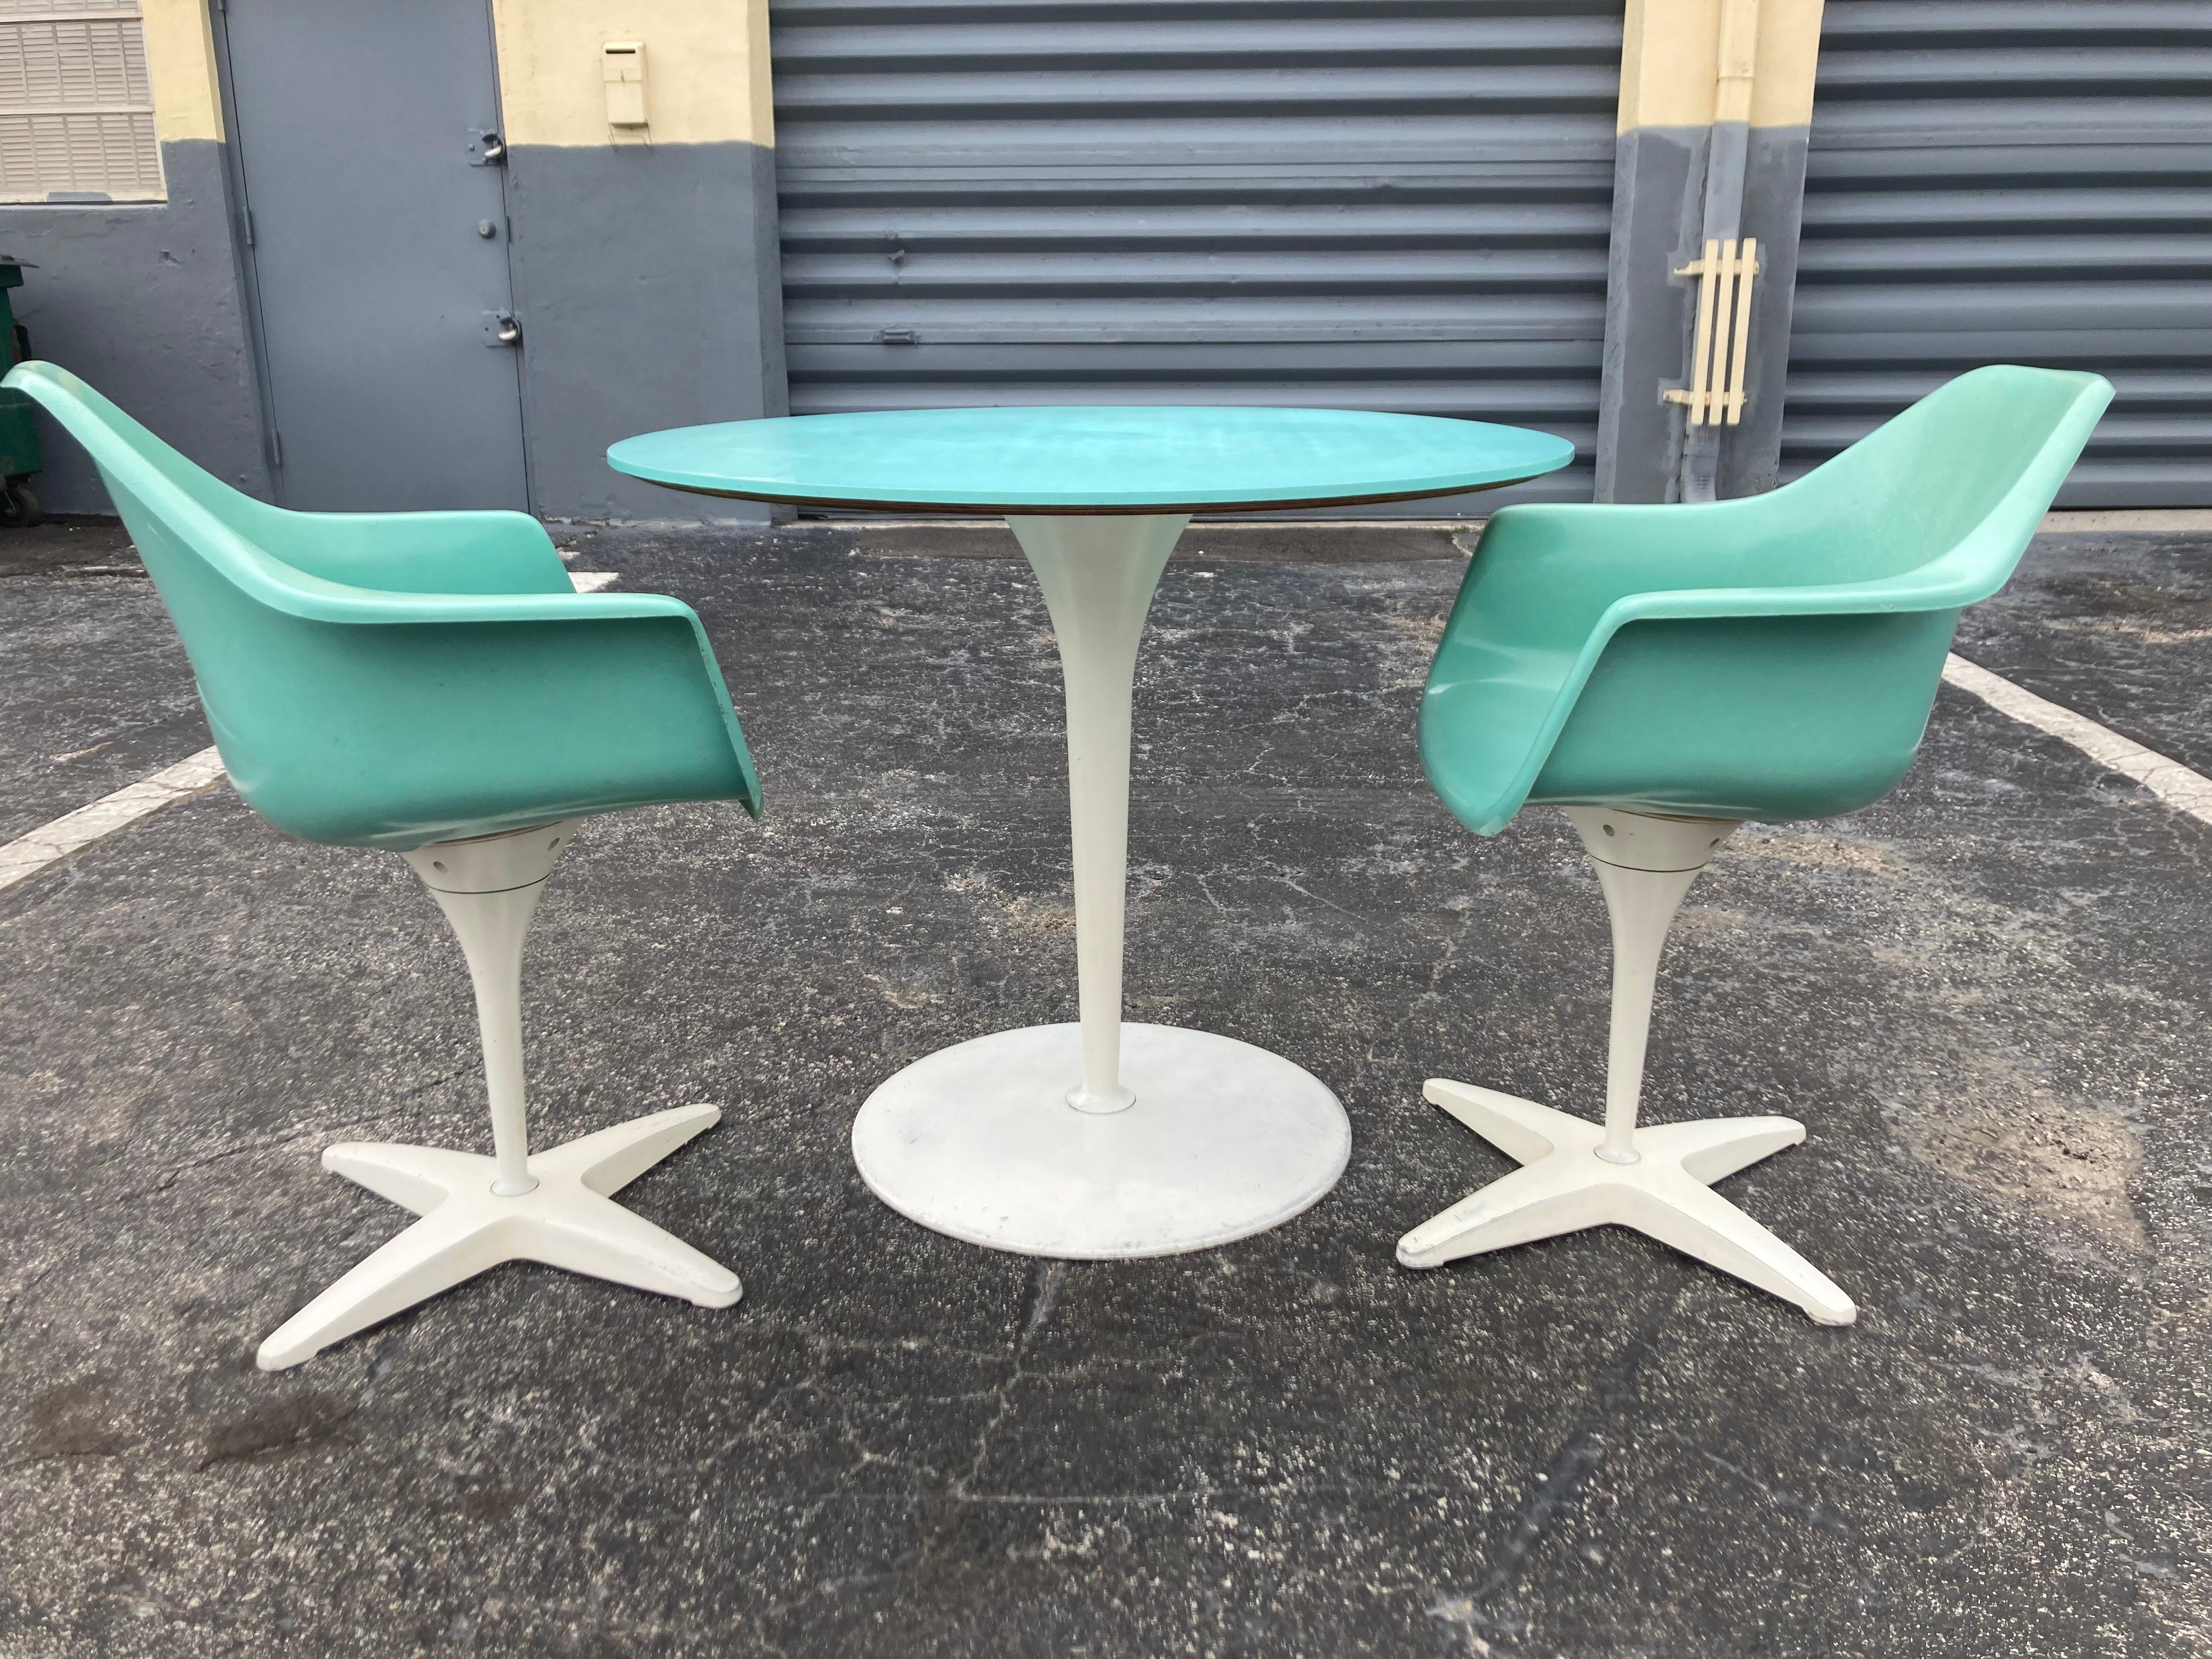 1960s Kitchen Dinette Set, Fiberglass Chairs, Turquoise, Round Table, USA For Sale 2